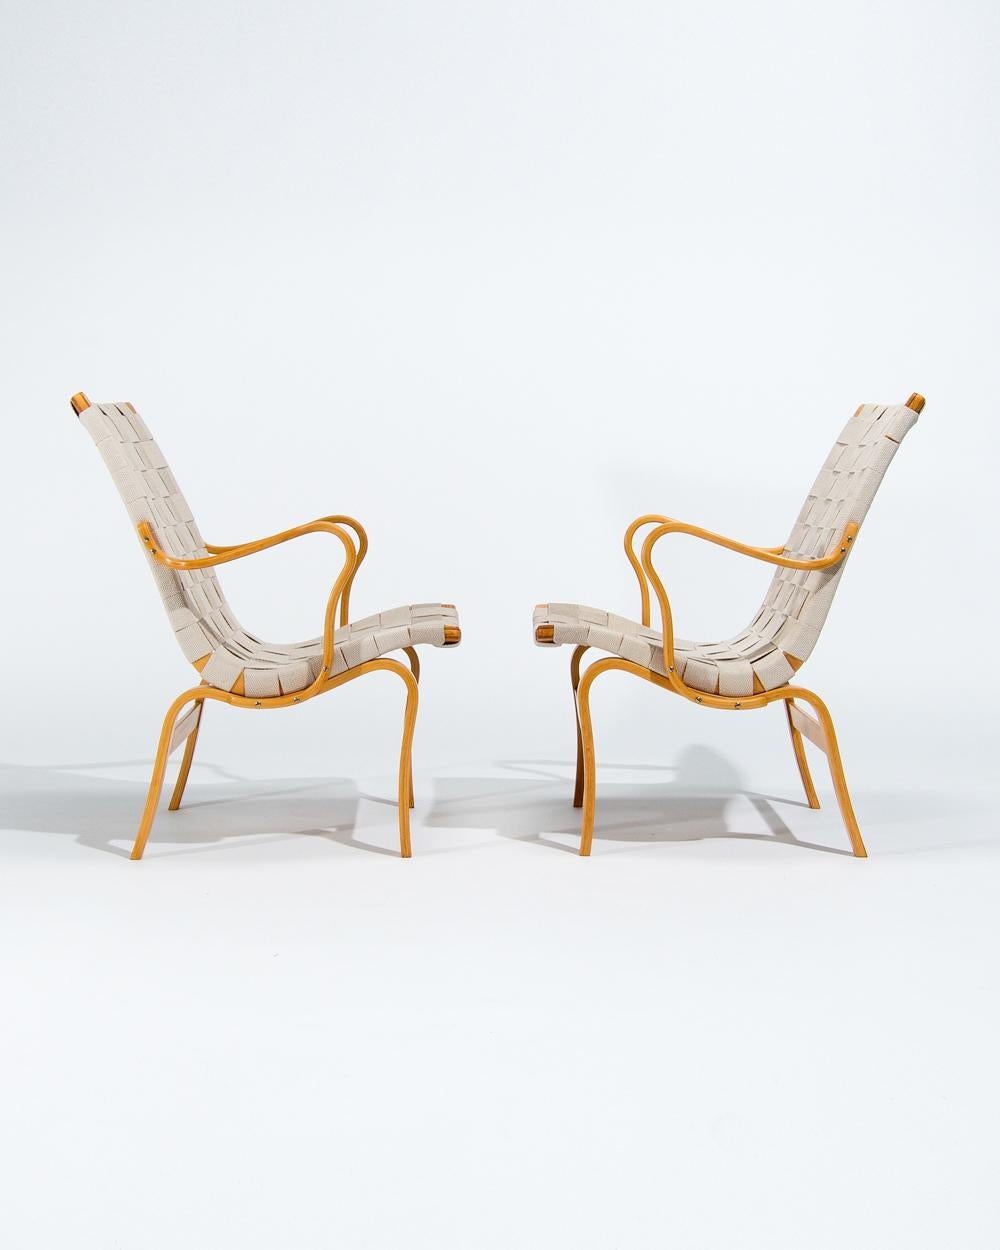 A lovely pair of Scandinavian armchairs designed by Bruno Mathsson and made by DUX Sweden in the 1960’s. A simple and elegant design by one of the preeminent Scandinavian designers of the period the Eva chair has been featured in design museums all